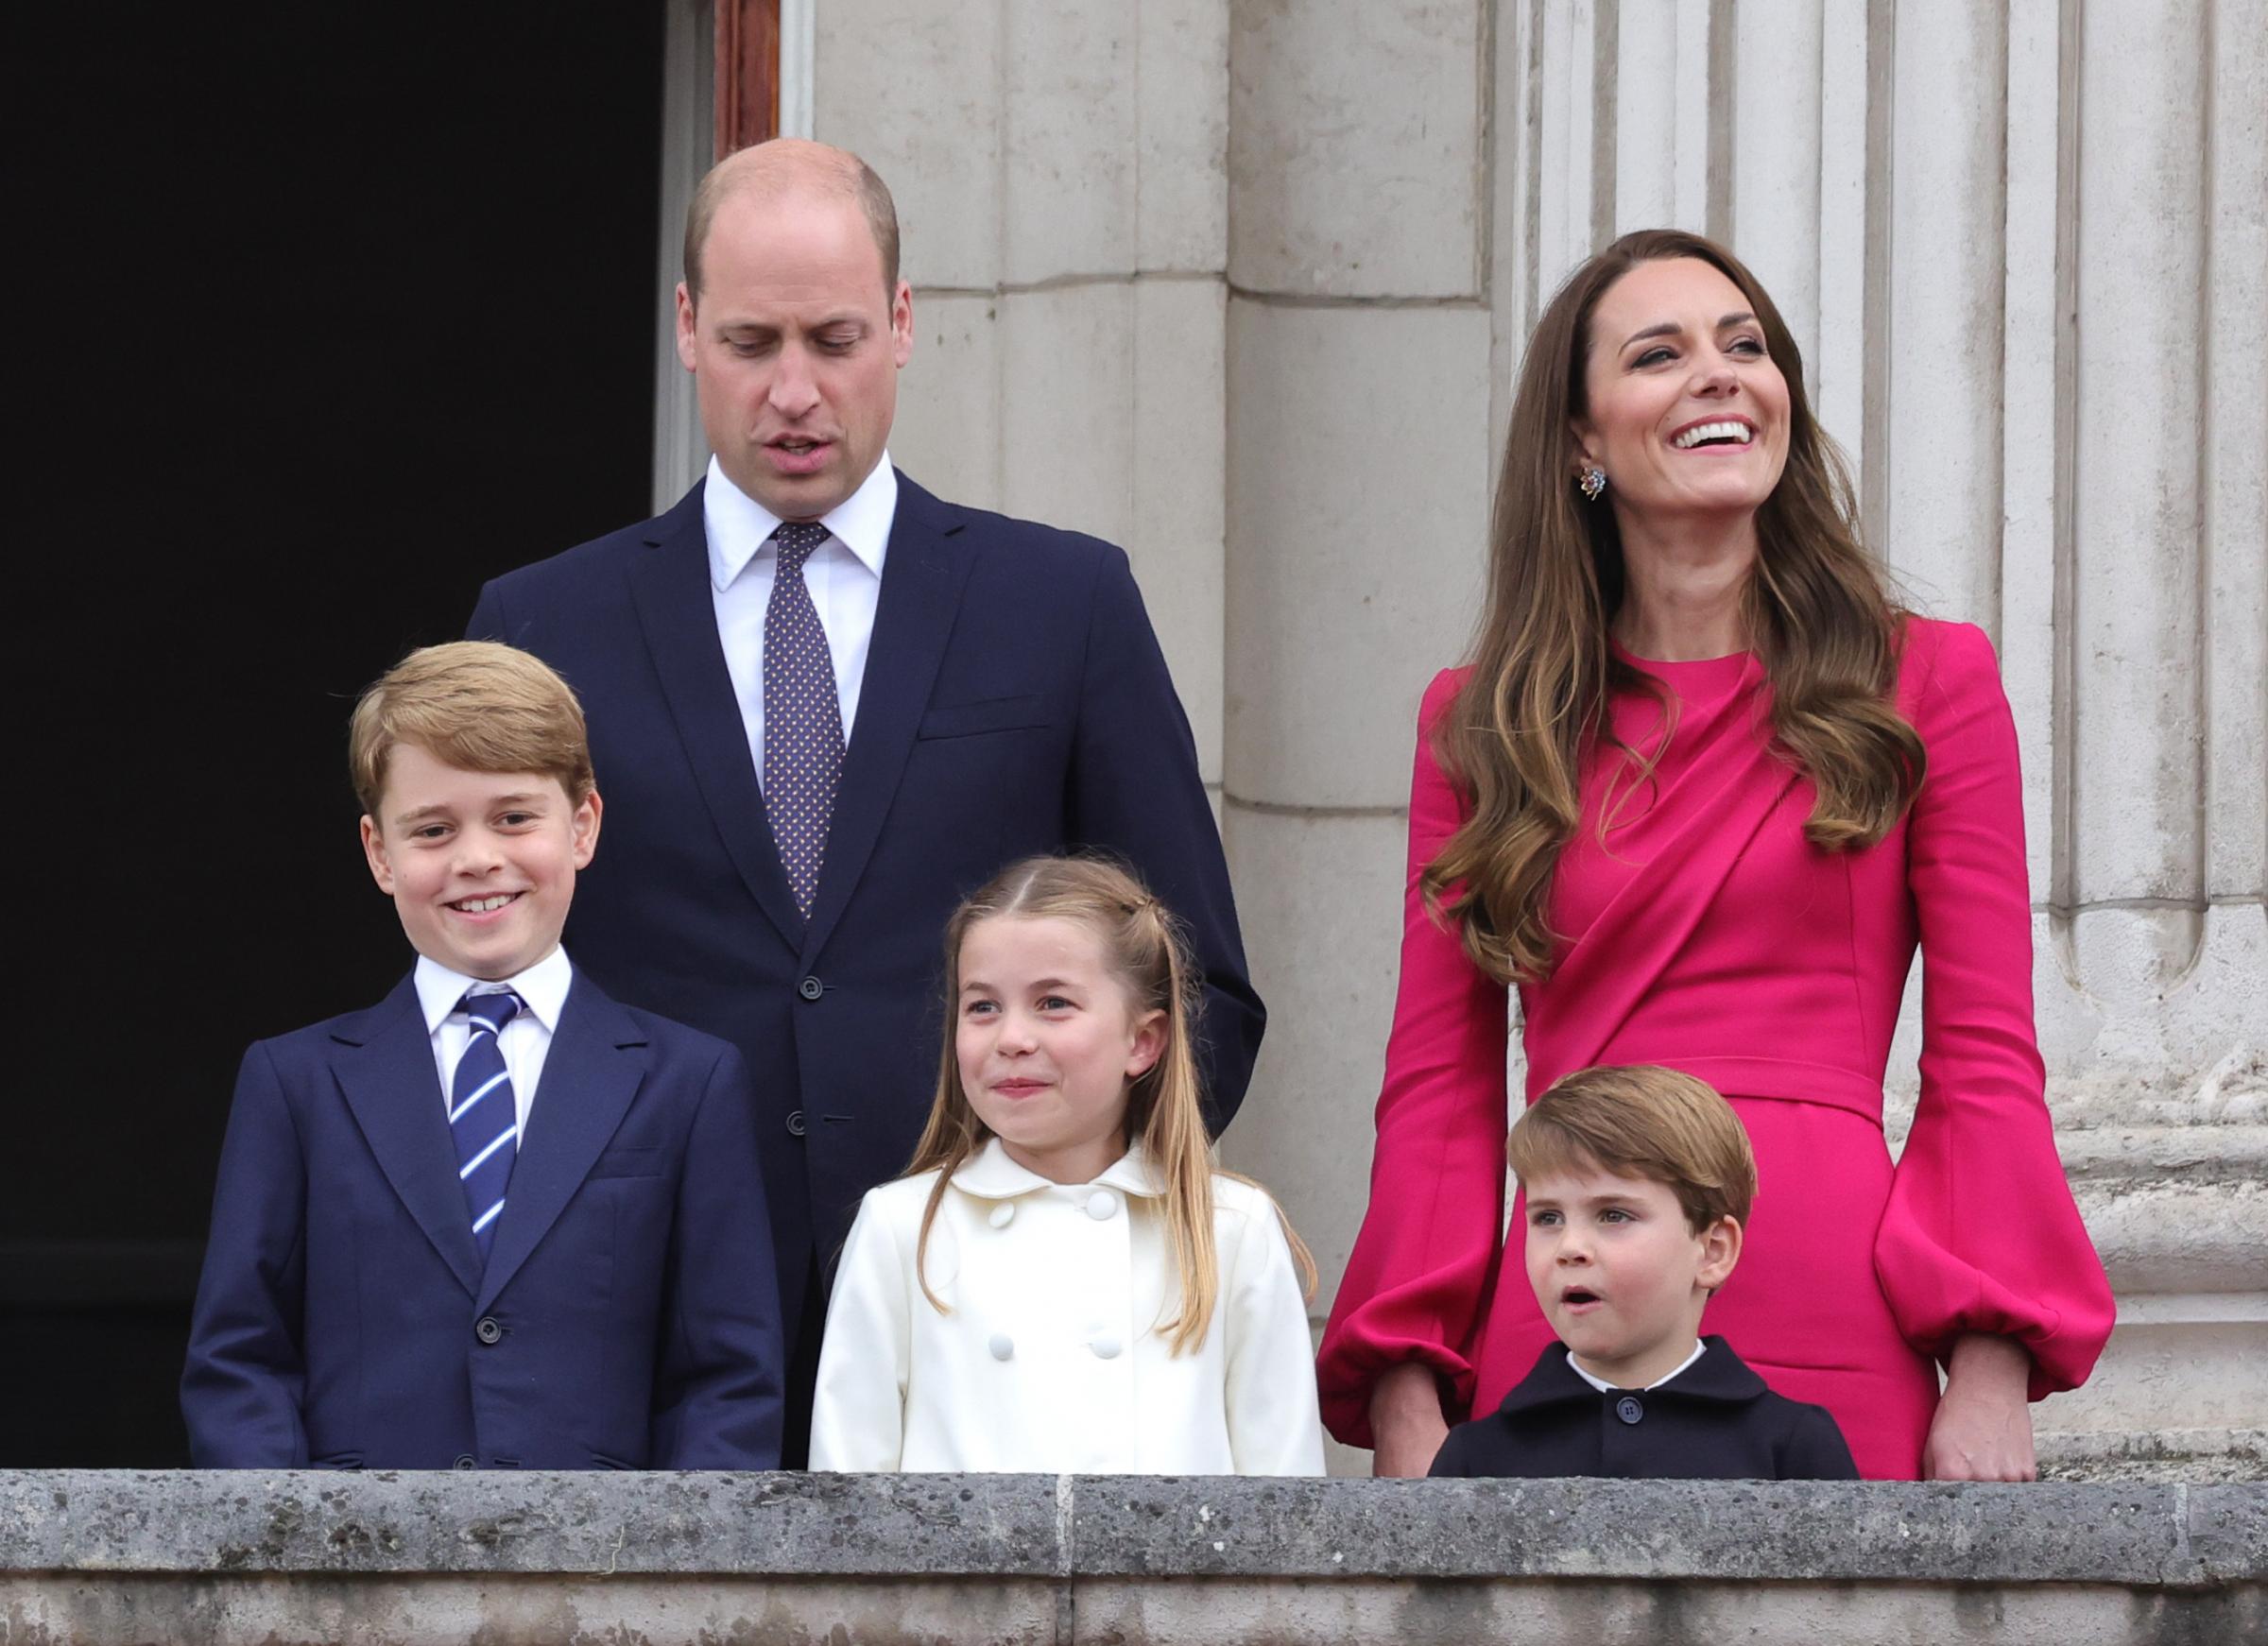 Prince George, the Duke of Cambridge, Princess Charlotte, Prince Louis and the Duchess of Cambridge stand on the balcony during the Platinum Jubilee Pageant at Buckingham Palace.